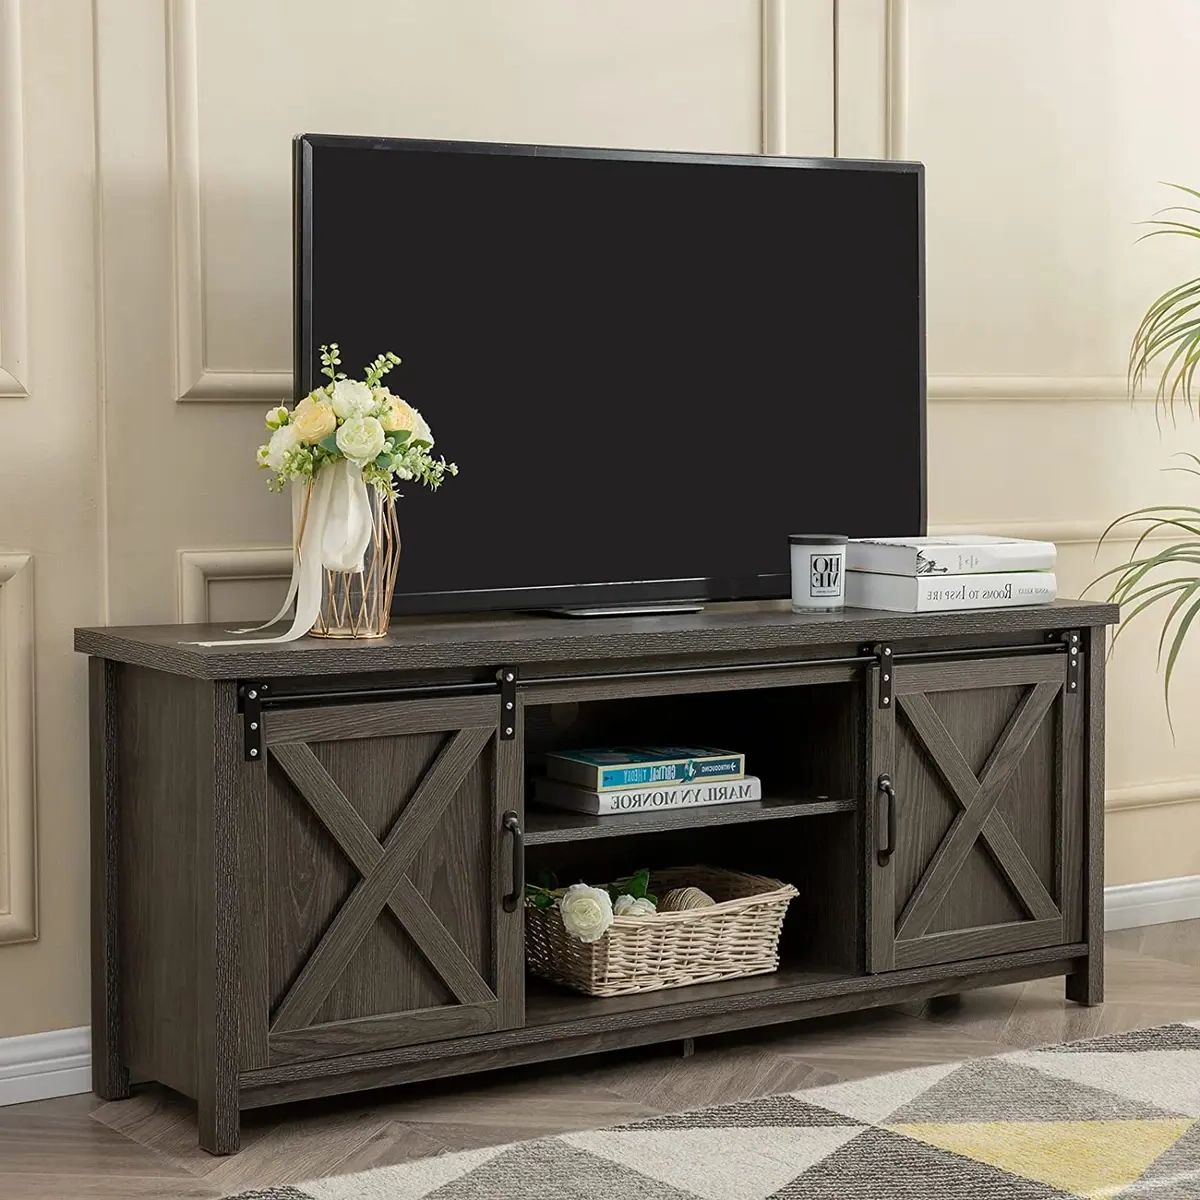 Modern Farmhouse Tv Stand With Sliding Barn Doors, Media Entertainment  Center Co | Ebay Pertaining To Barn Door Media Tv Stands (View 4 of 20)